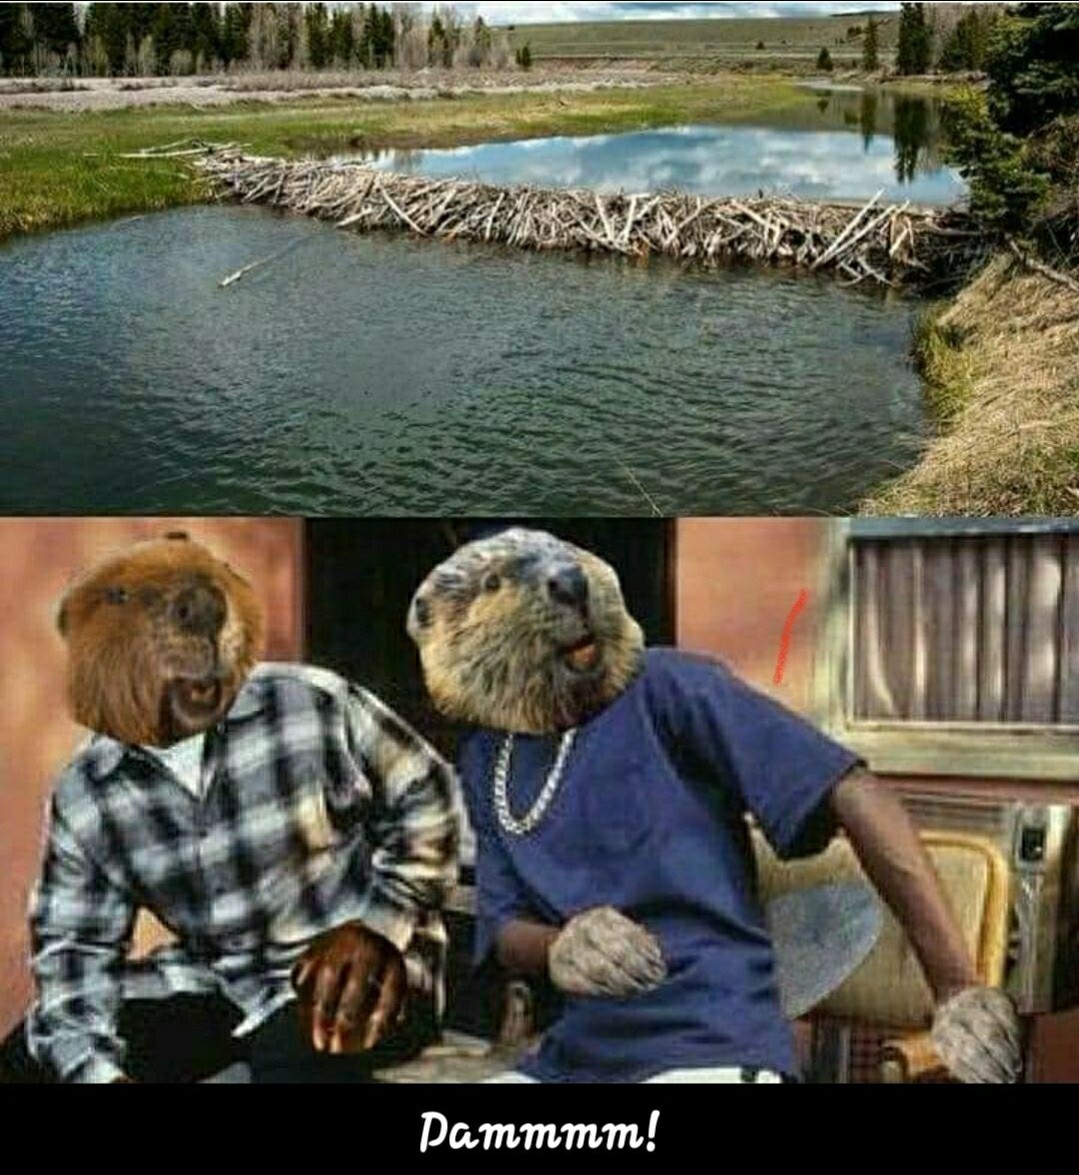 Beaver memes really are a thing now? Lmao